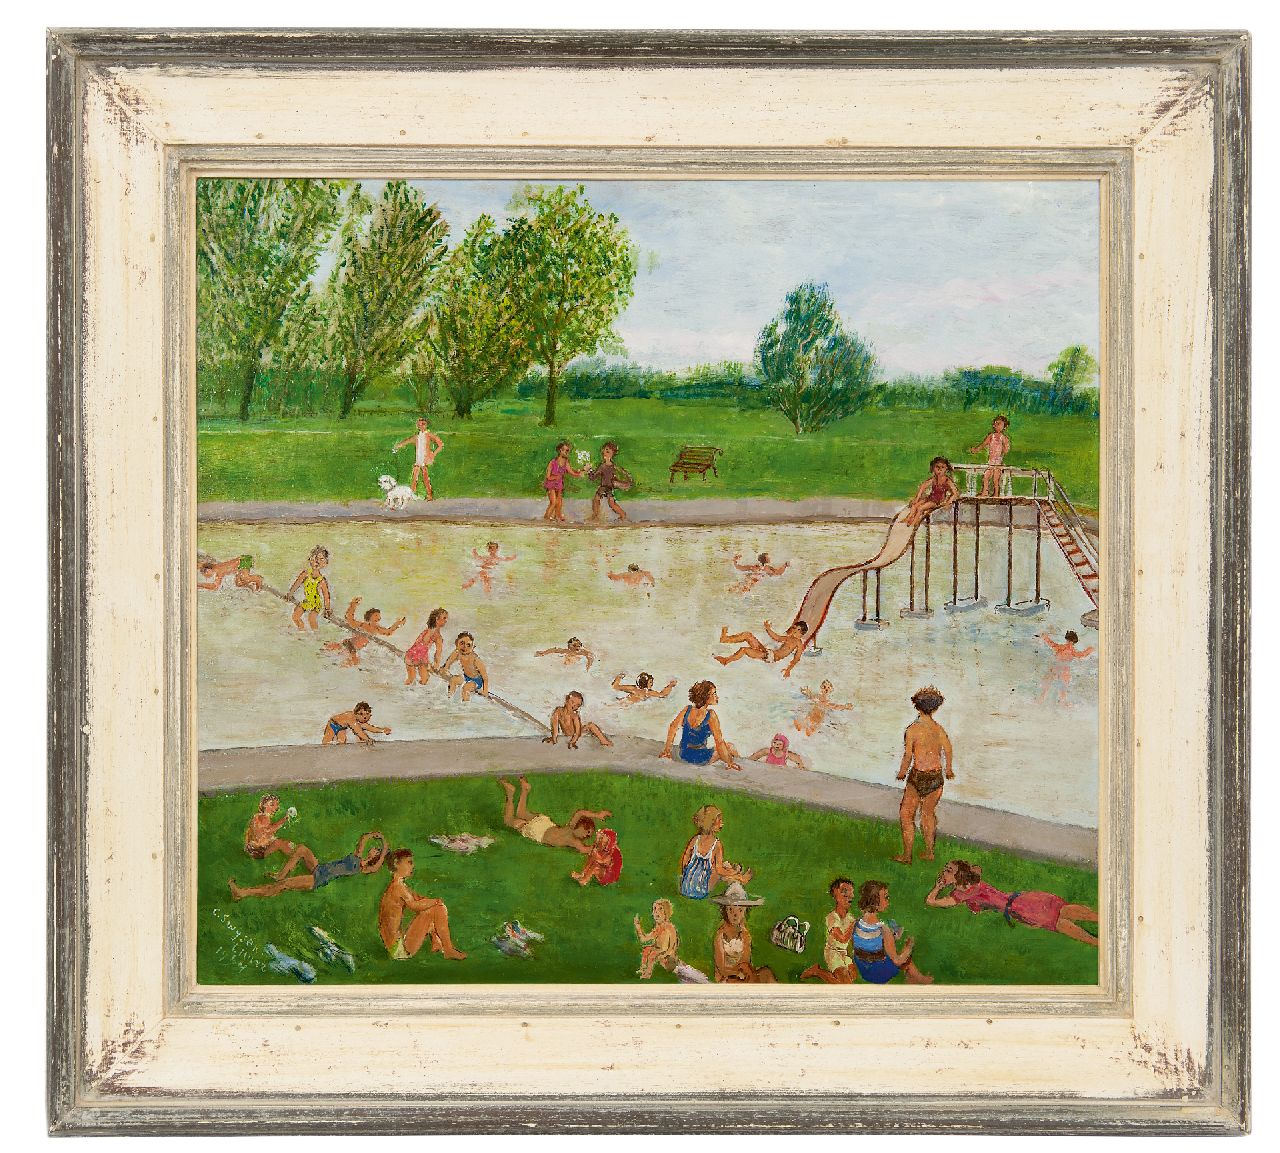 Swijser-'t Hart C.C.M.  | Catharina 'Christina' Maria Swijser-'t Hart | Paintings offered for sale | Swimming pool in summer, oil on board 48.8 x 54.4 cm, signed l.l. and dated 1964